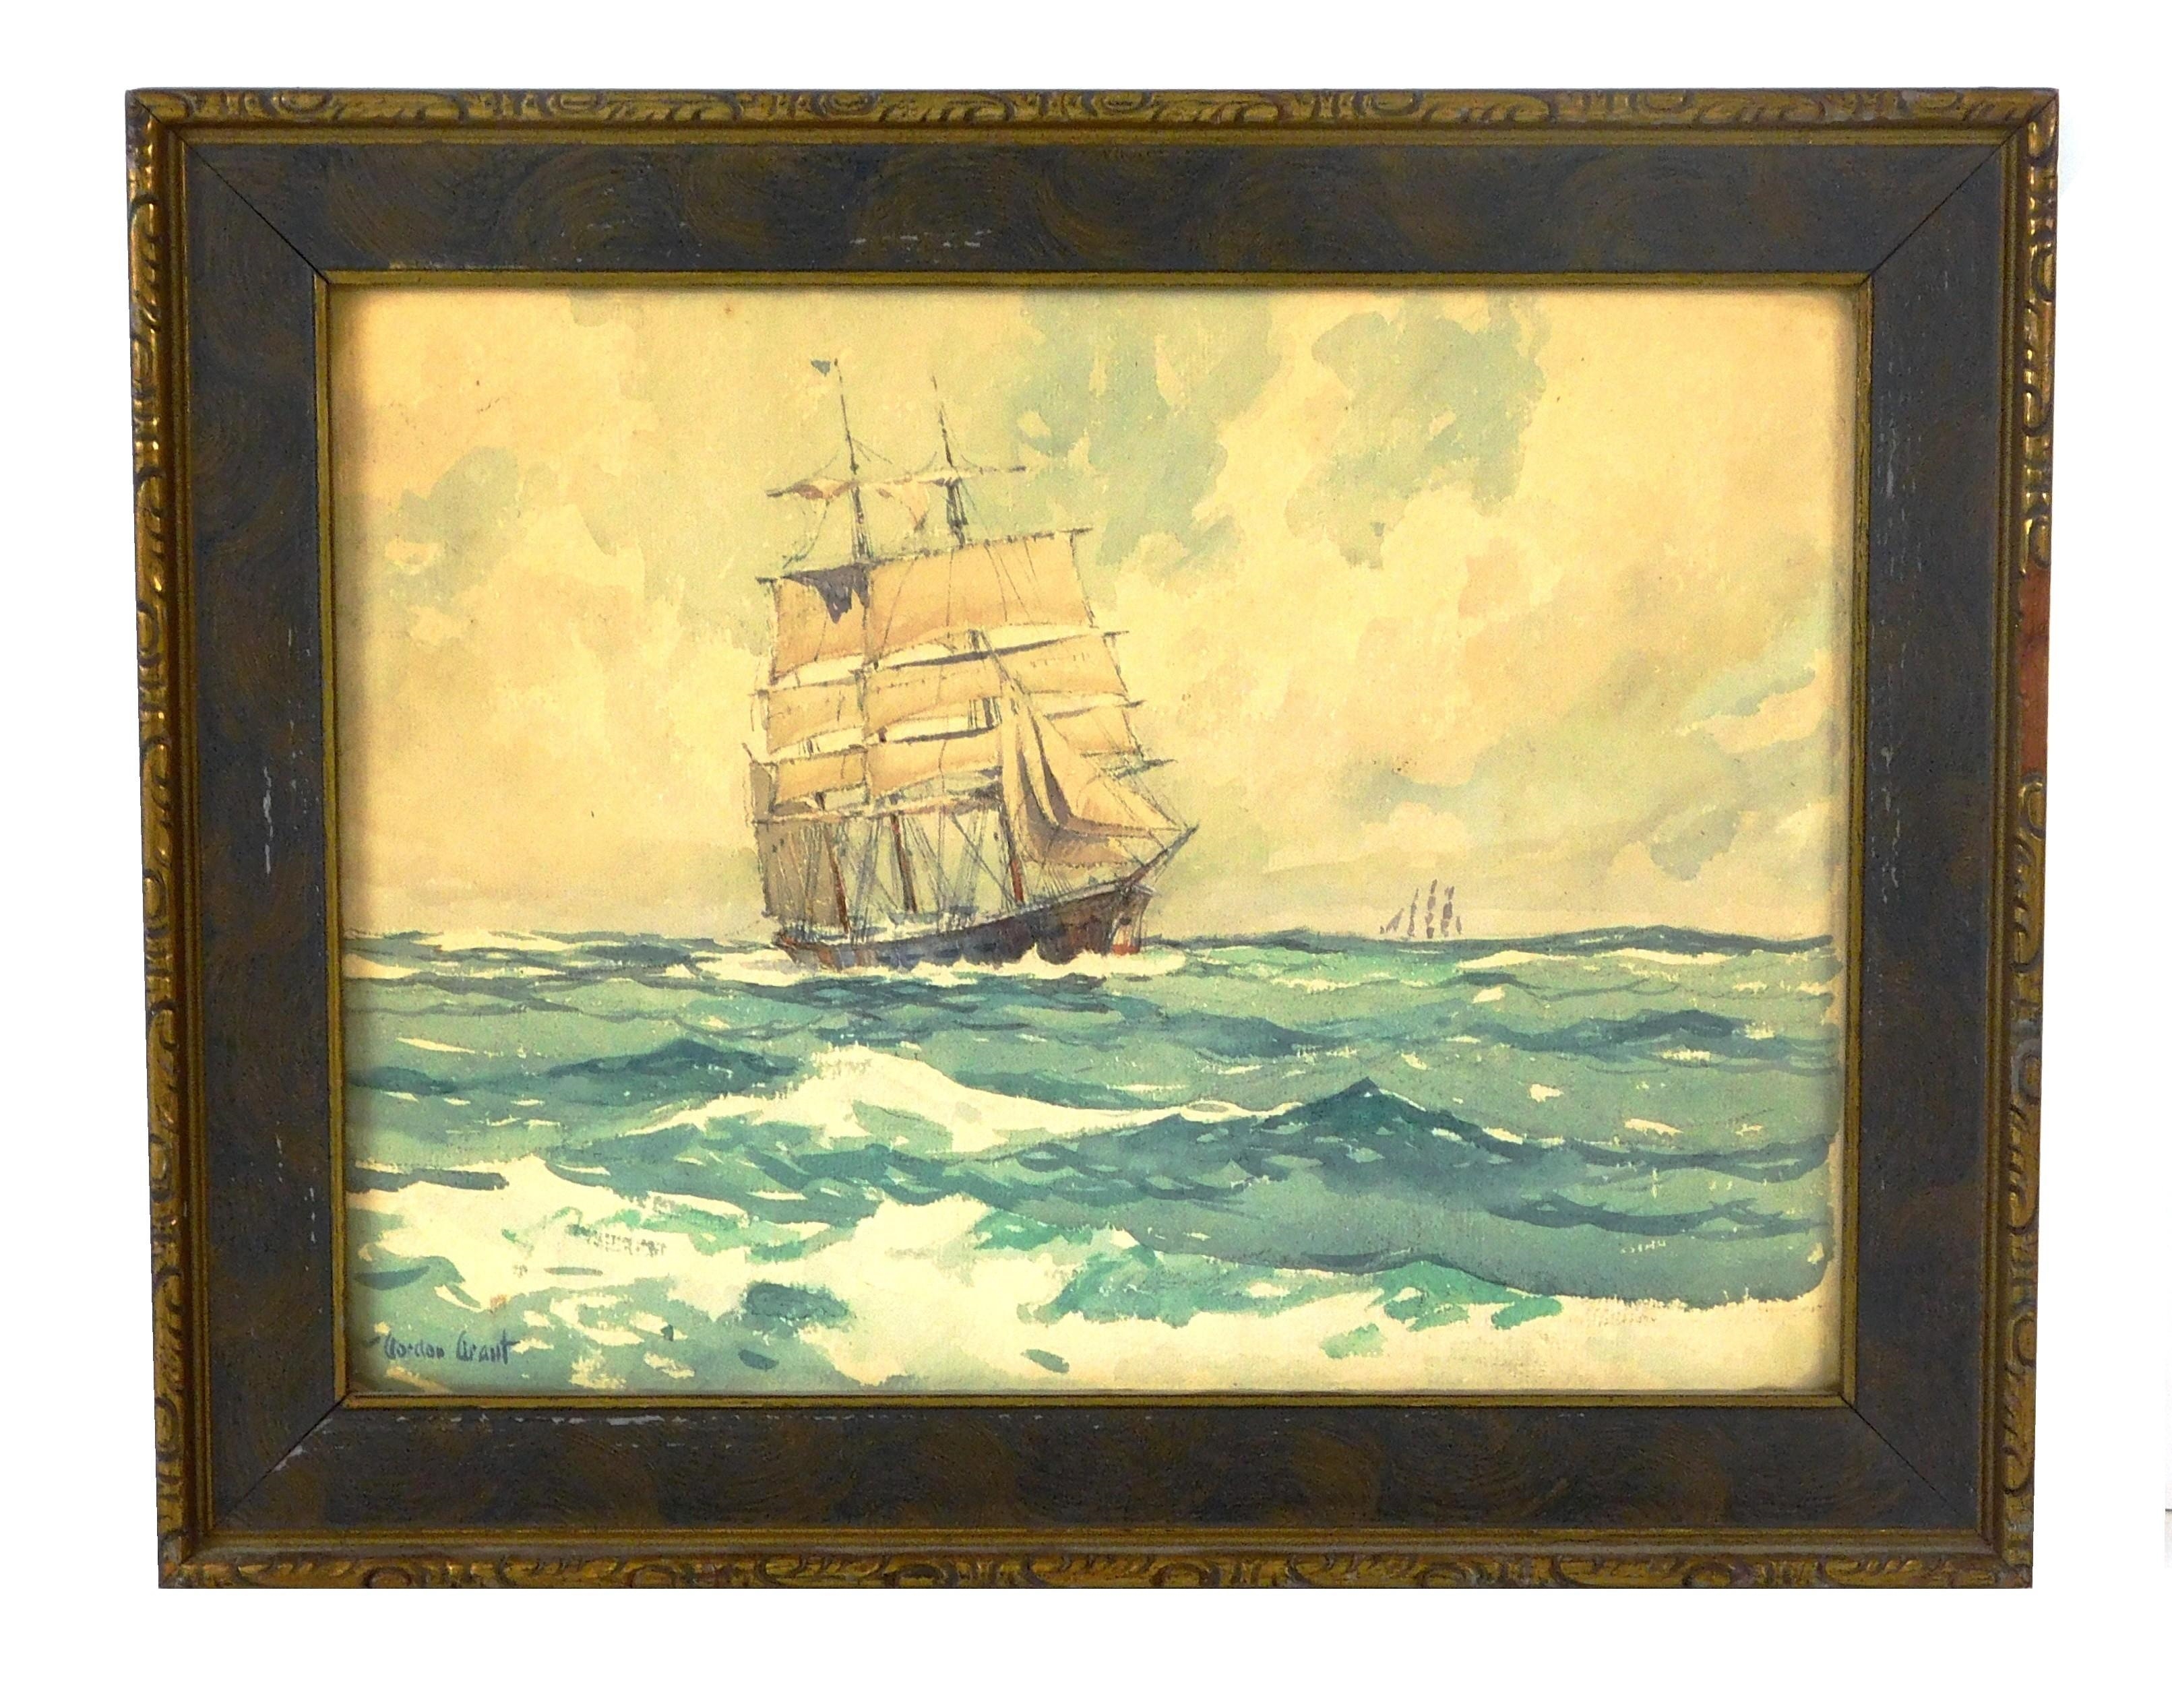 Untitled, depicting two sail boats with three masts on each sailing on the ocean, by Gordon Grant